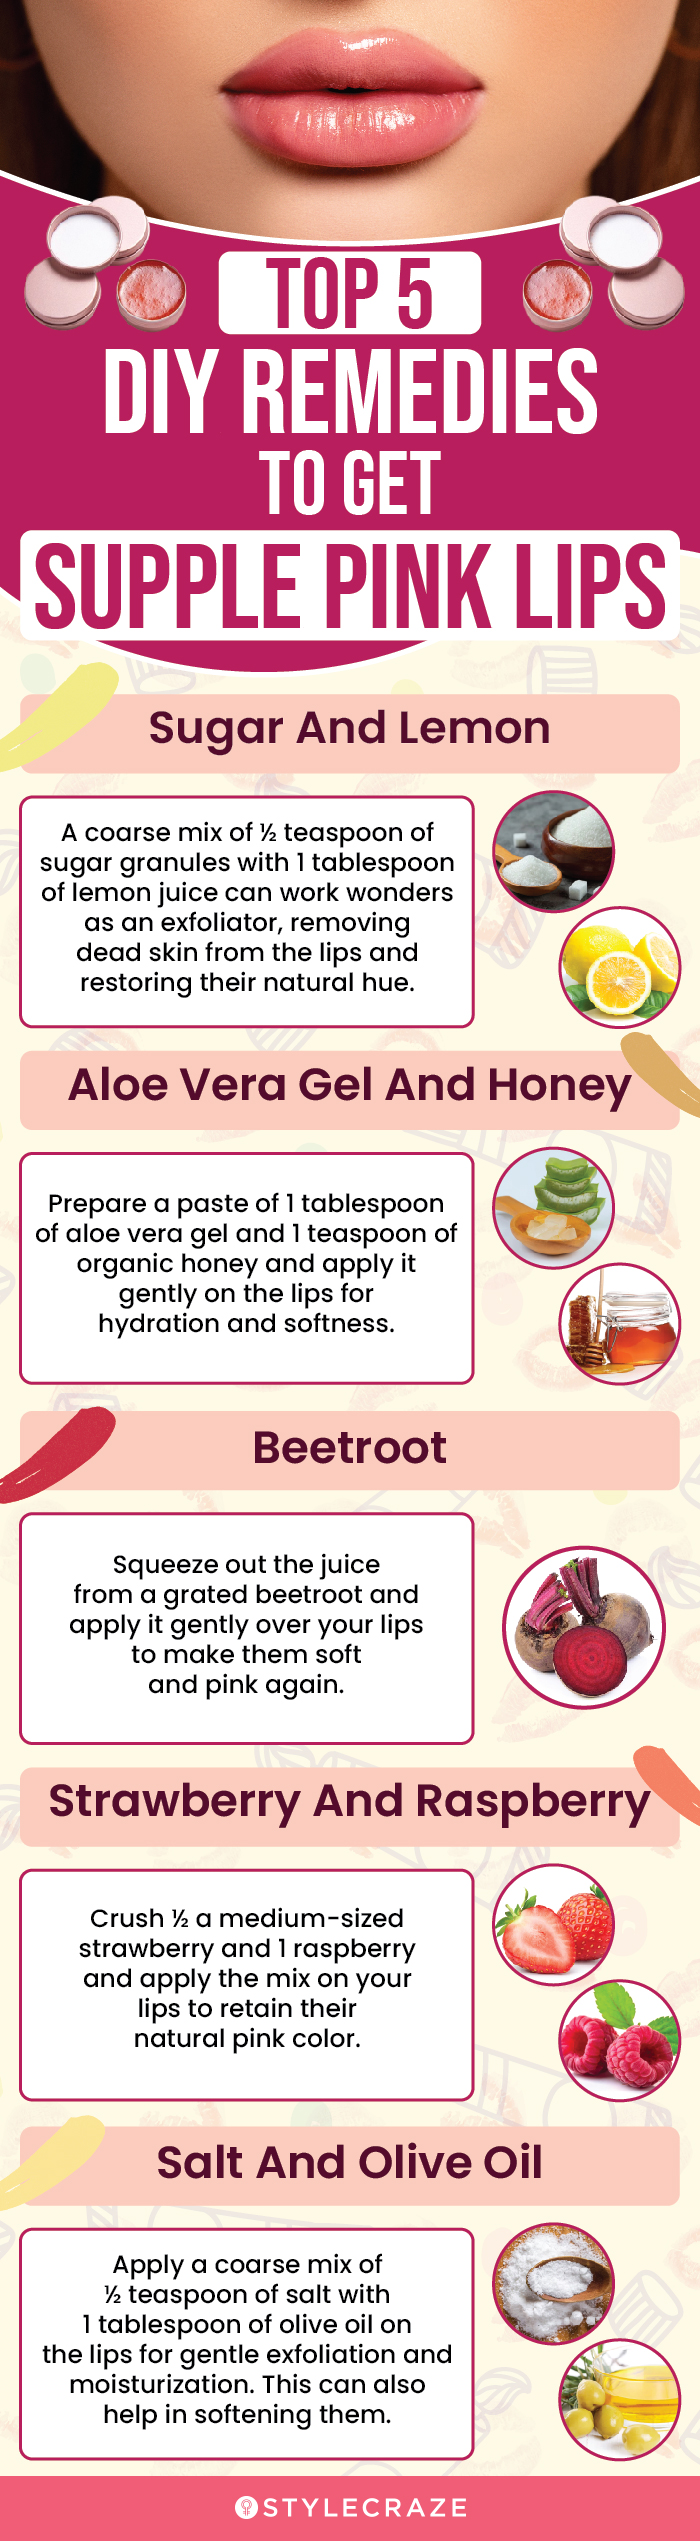 top 5 diy remedies to get supple pink lips (infographic)